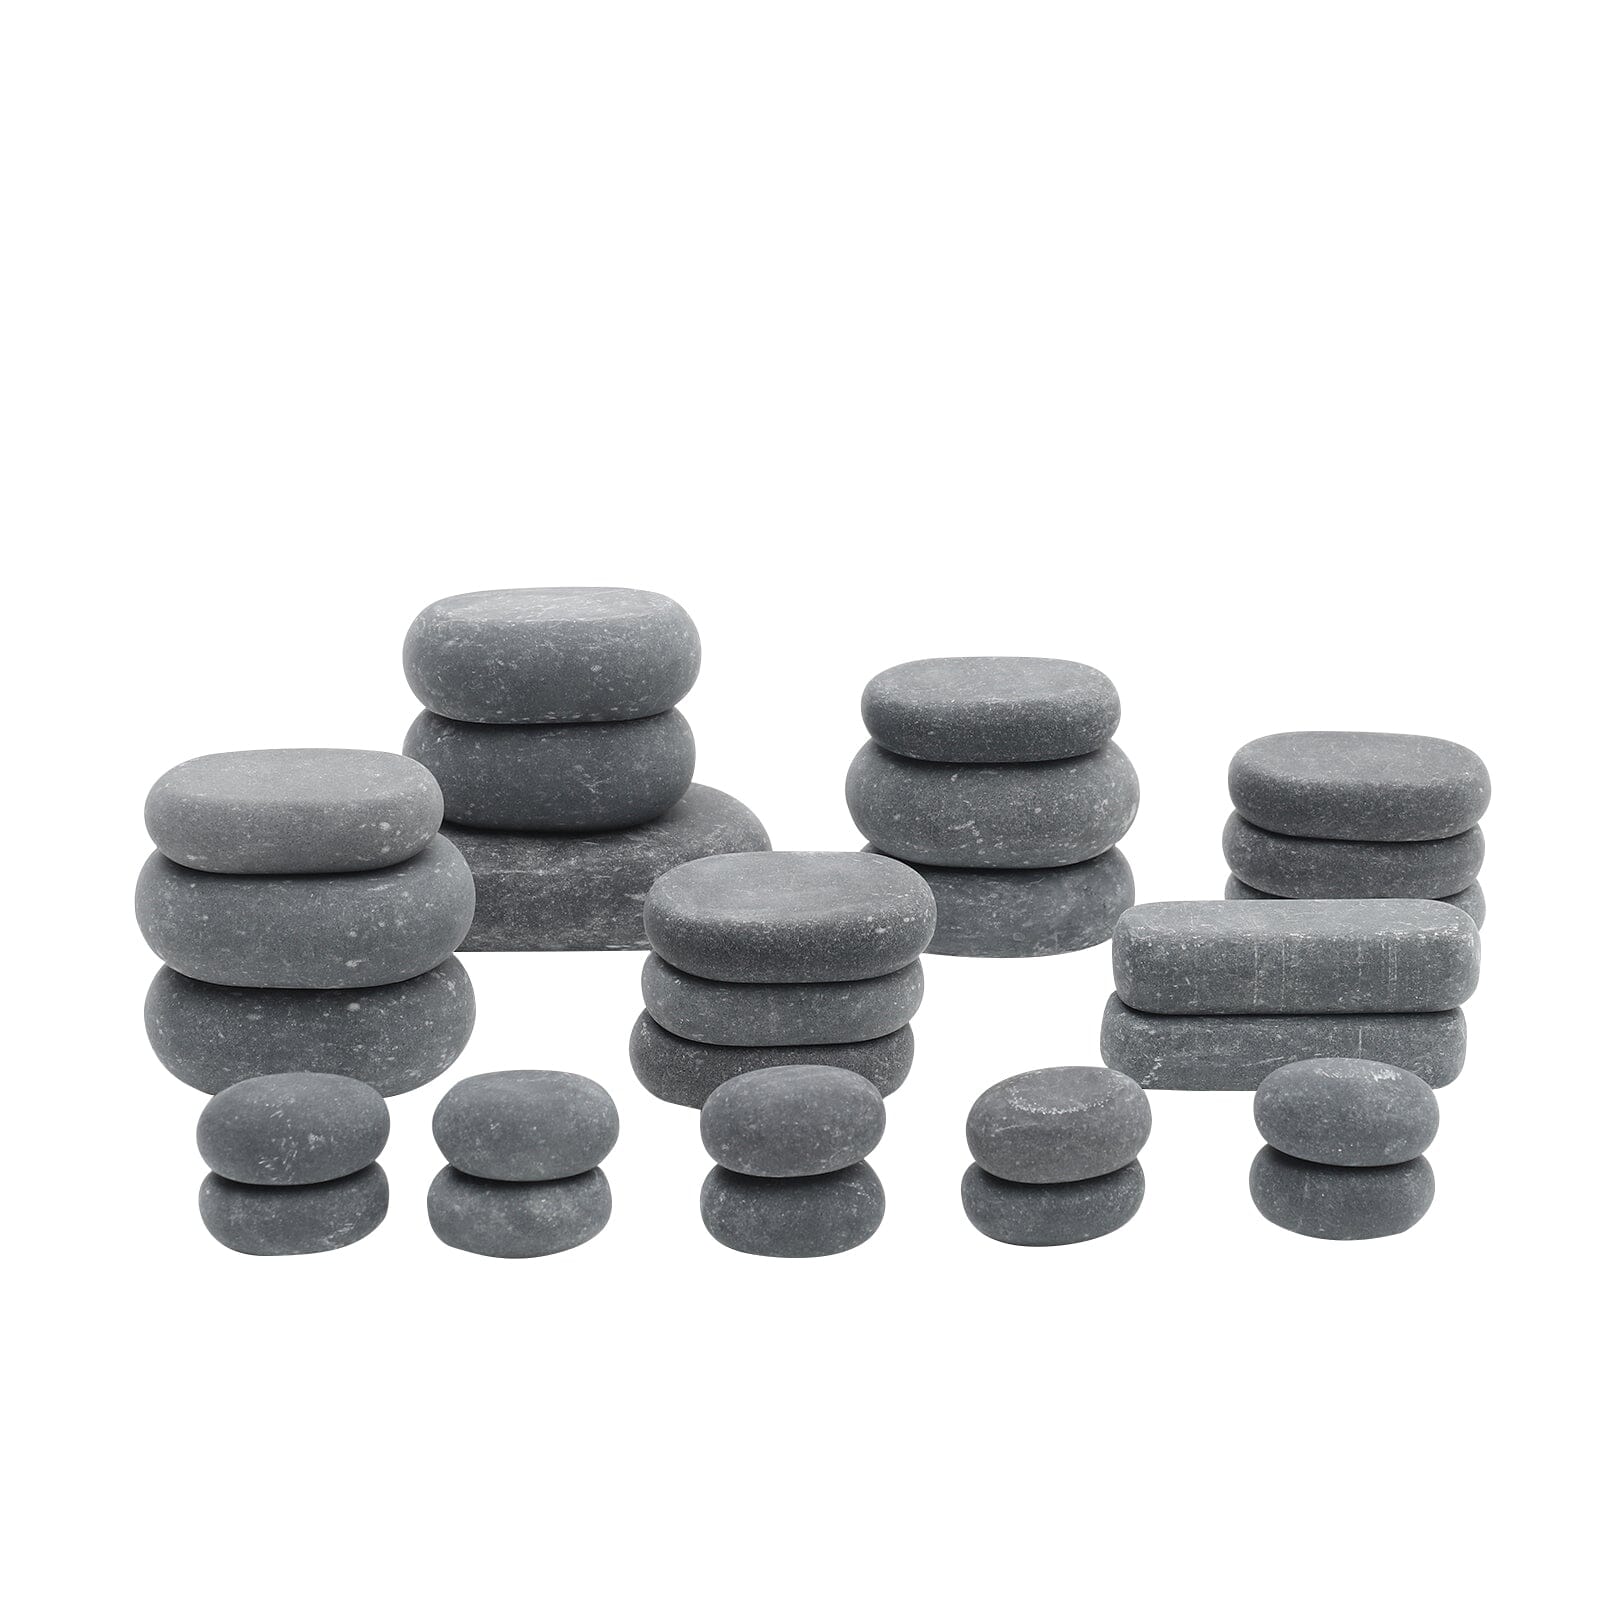 Basalt Massage Stone and Stainless Steel Heater Set for Spa Massage Stones Living and Home 27Pcs Stone Set 